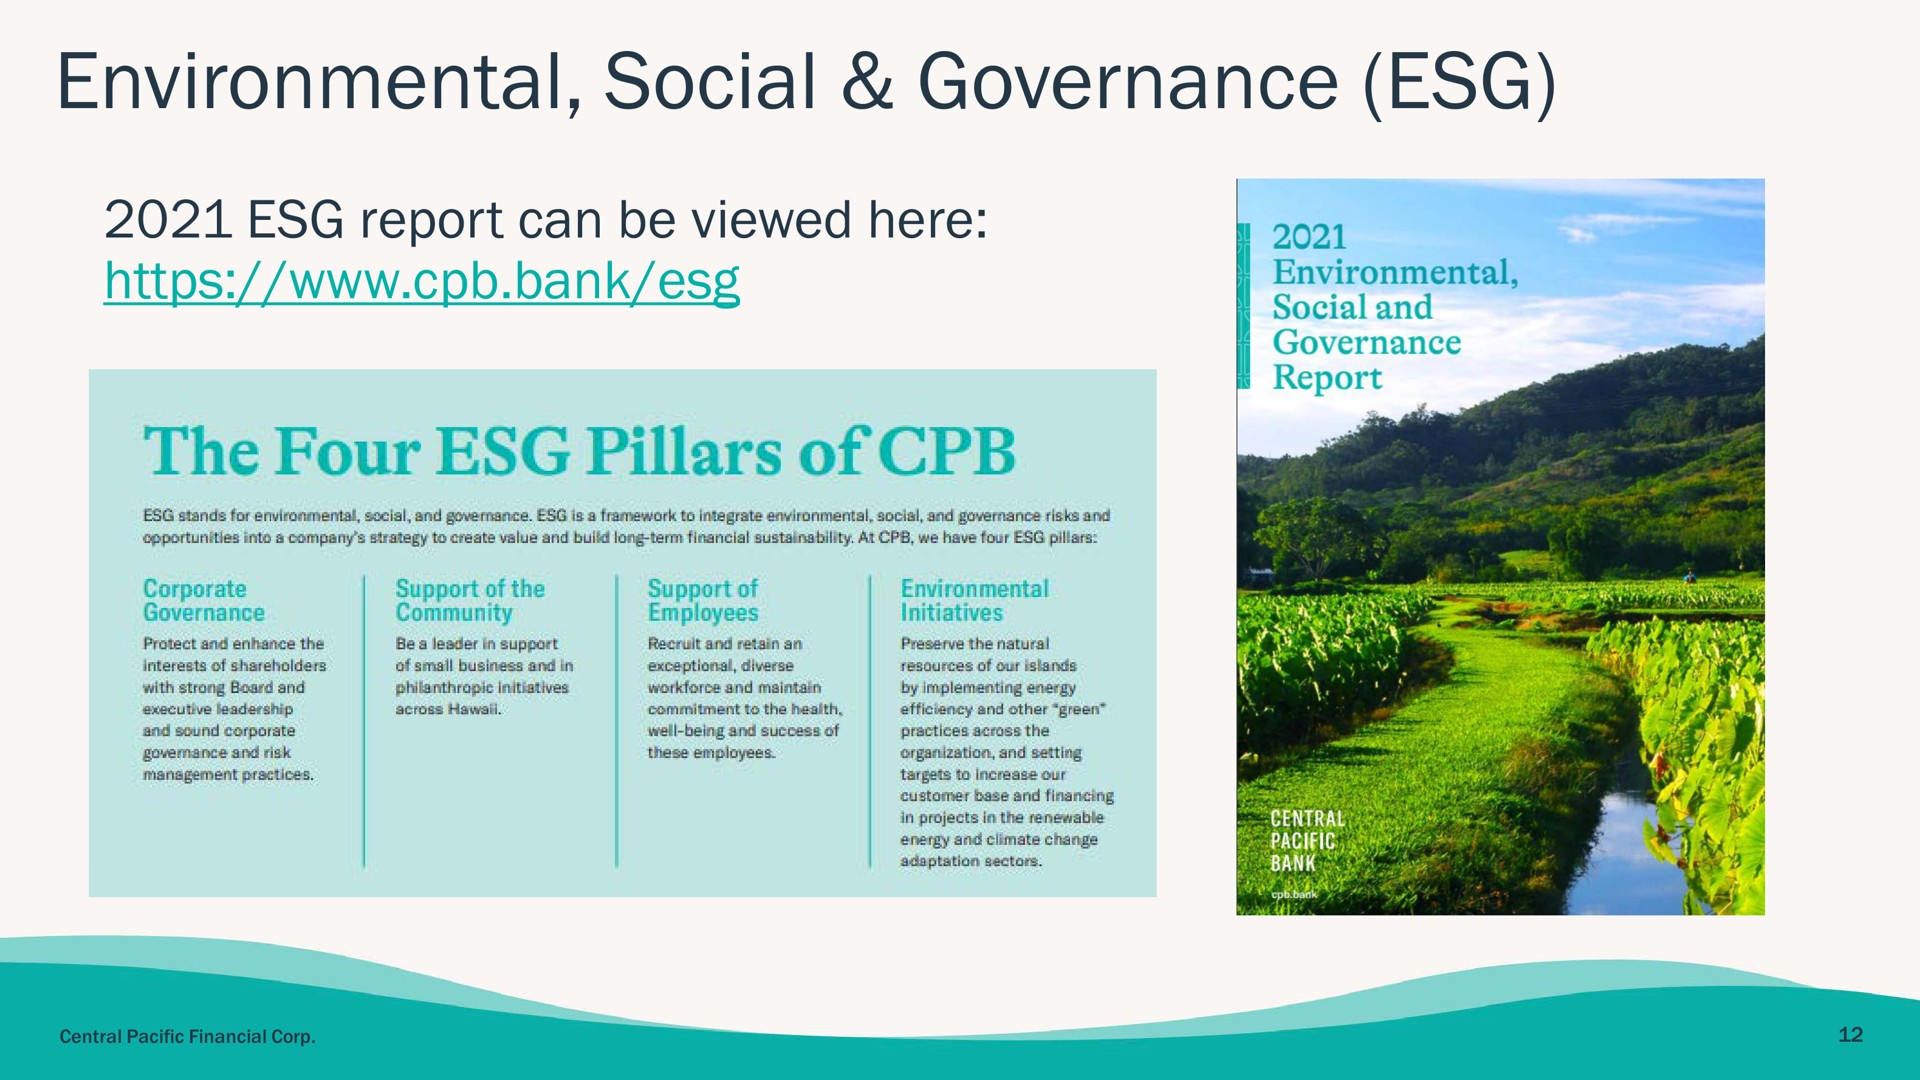 environmental social governance report can be viewed here bank the four pillars of | Central Pacific Financial